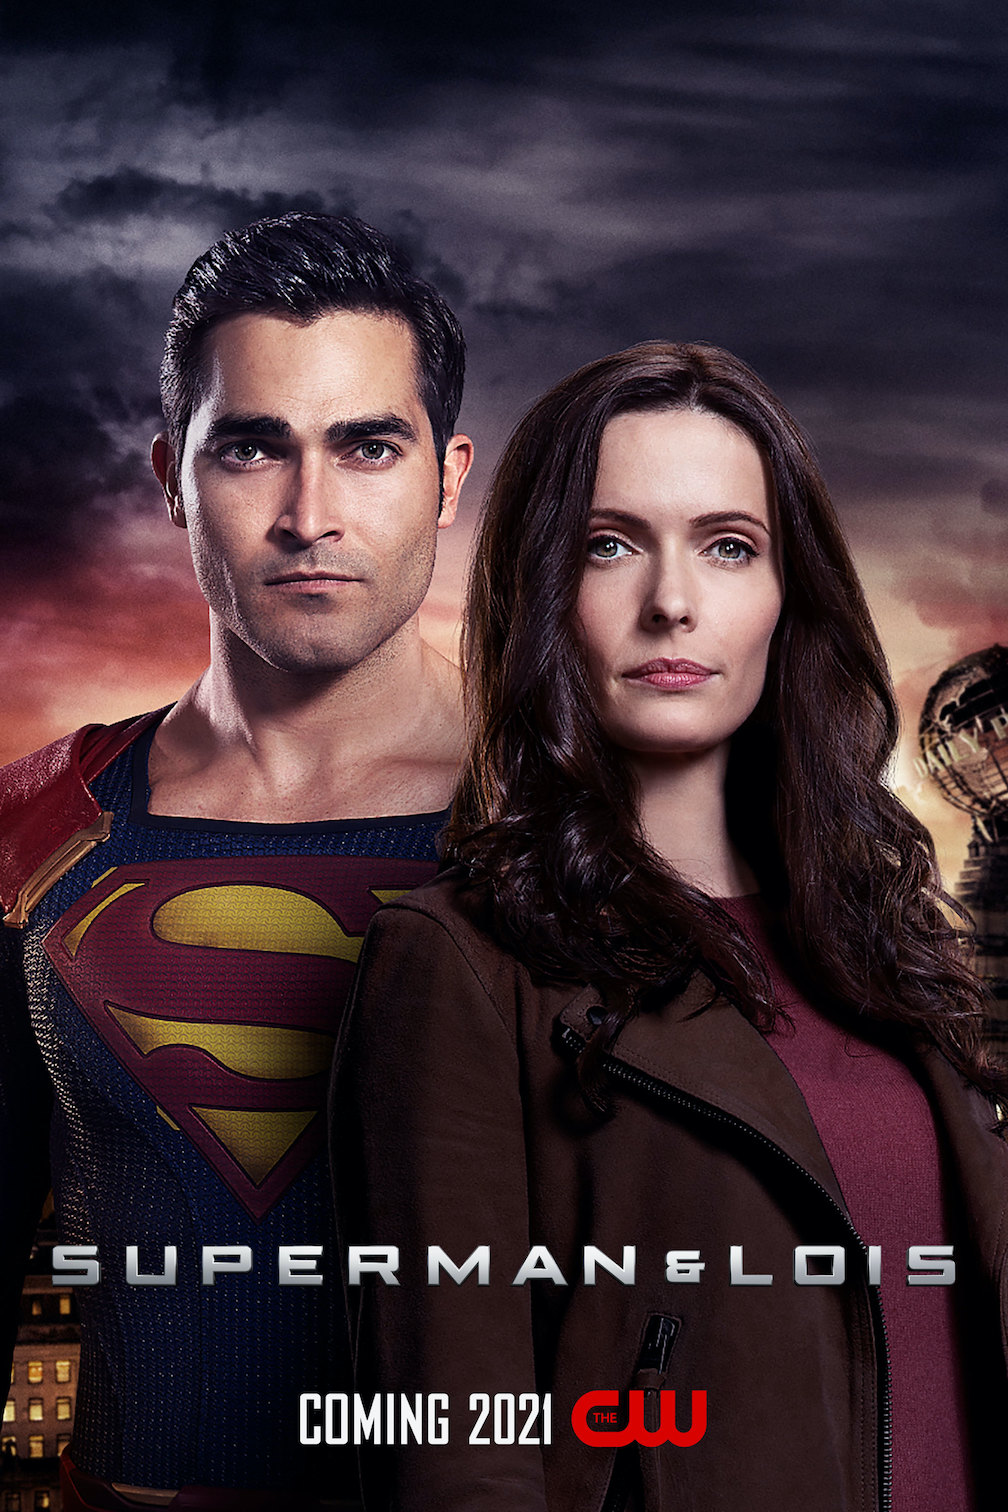 Pictured, from left: Tyler Hoechlin as Superman and Elizabeth Tulloch as Lois Lane. (Photo: The CW ©2020 All rights reserved.)